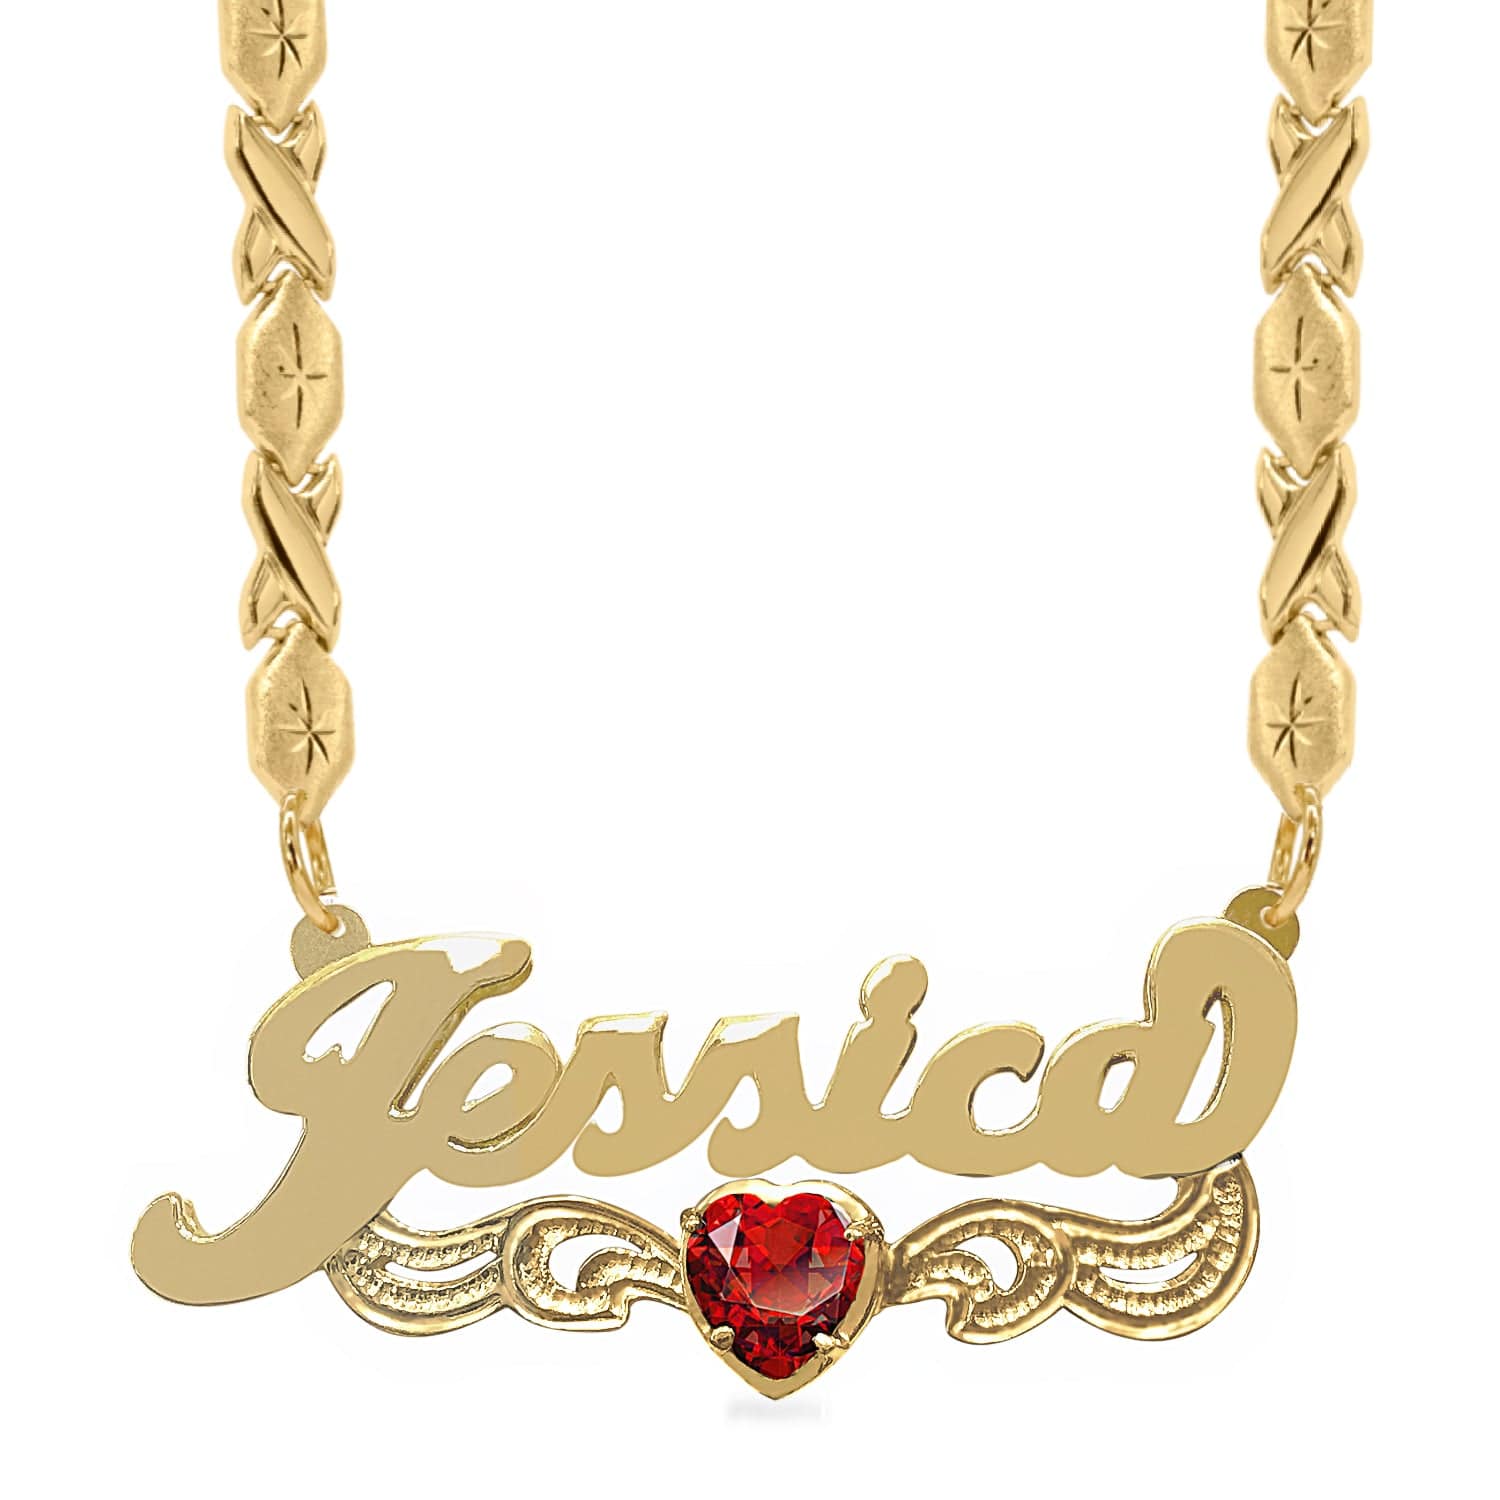 14k Gold over Sterling Silver / Xoxo Chain Birthstone Heart Rhodium "Double" Nameplate with Xoxo chain